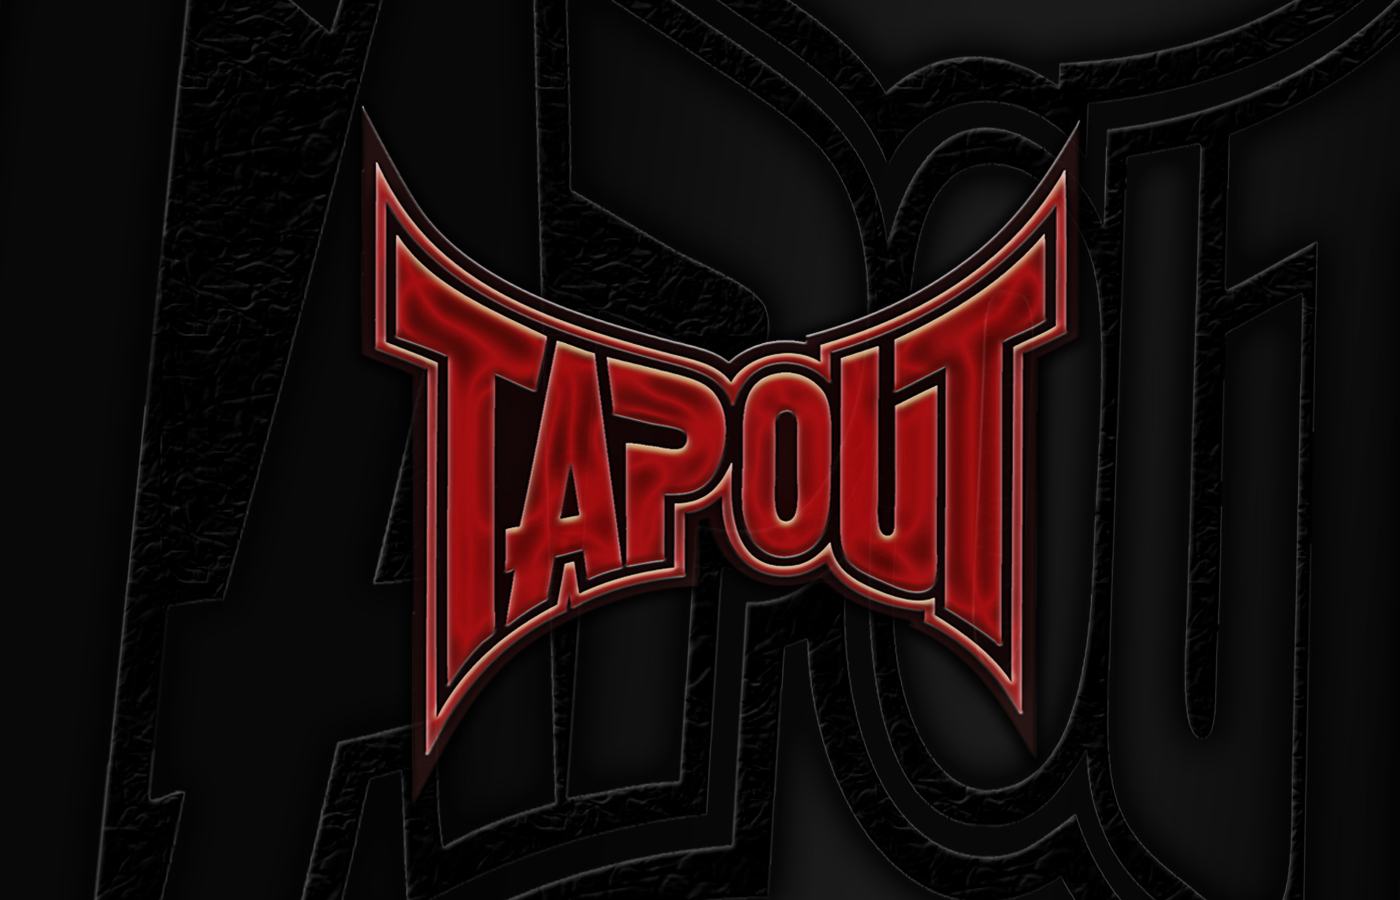 Sports   MMA Mma Mixed Martial Arts Tapout Wallpaper